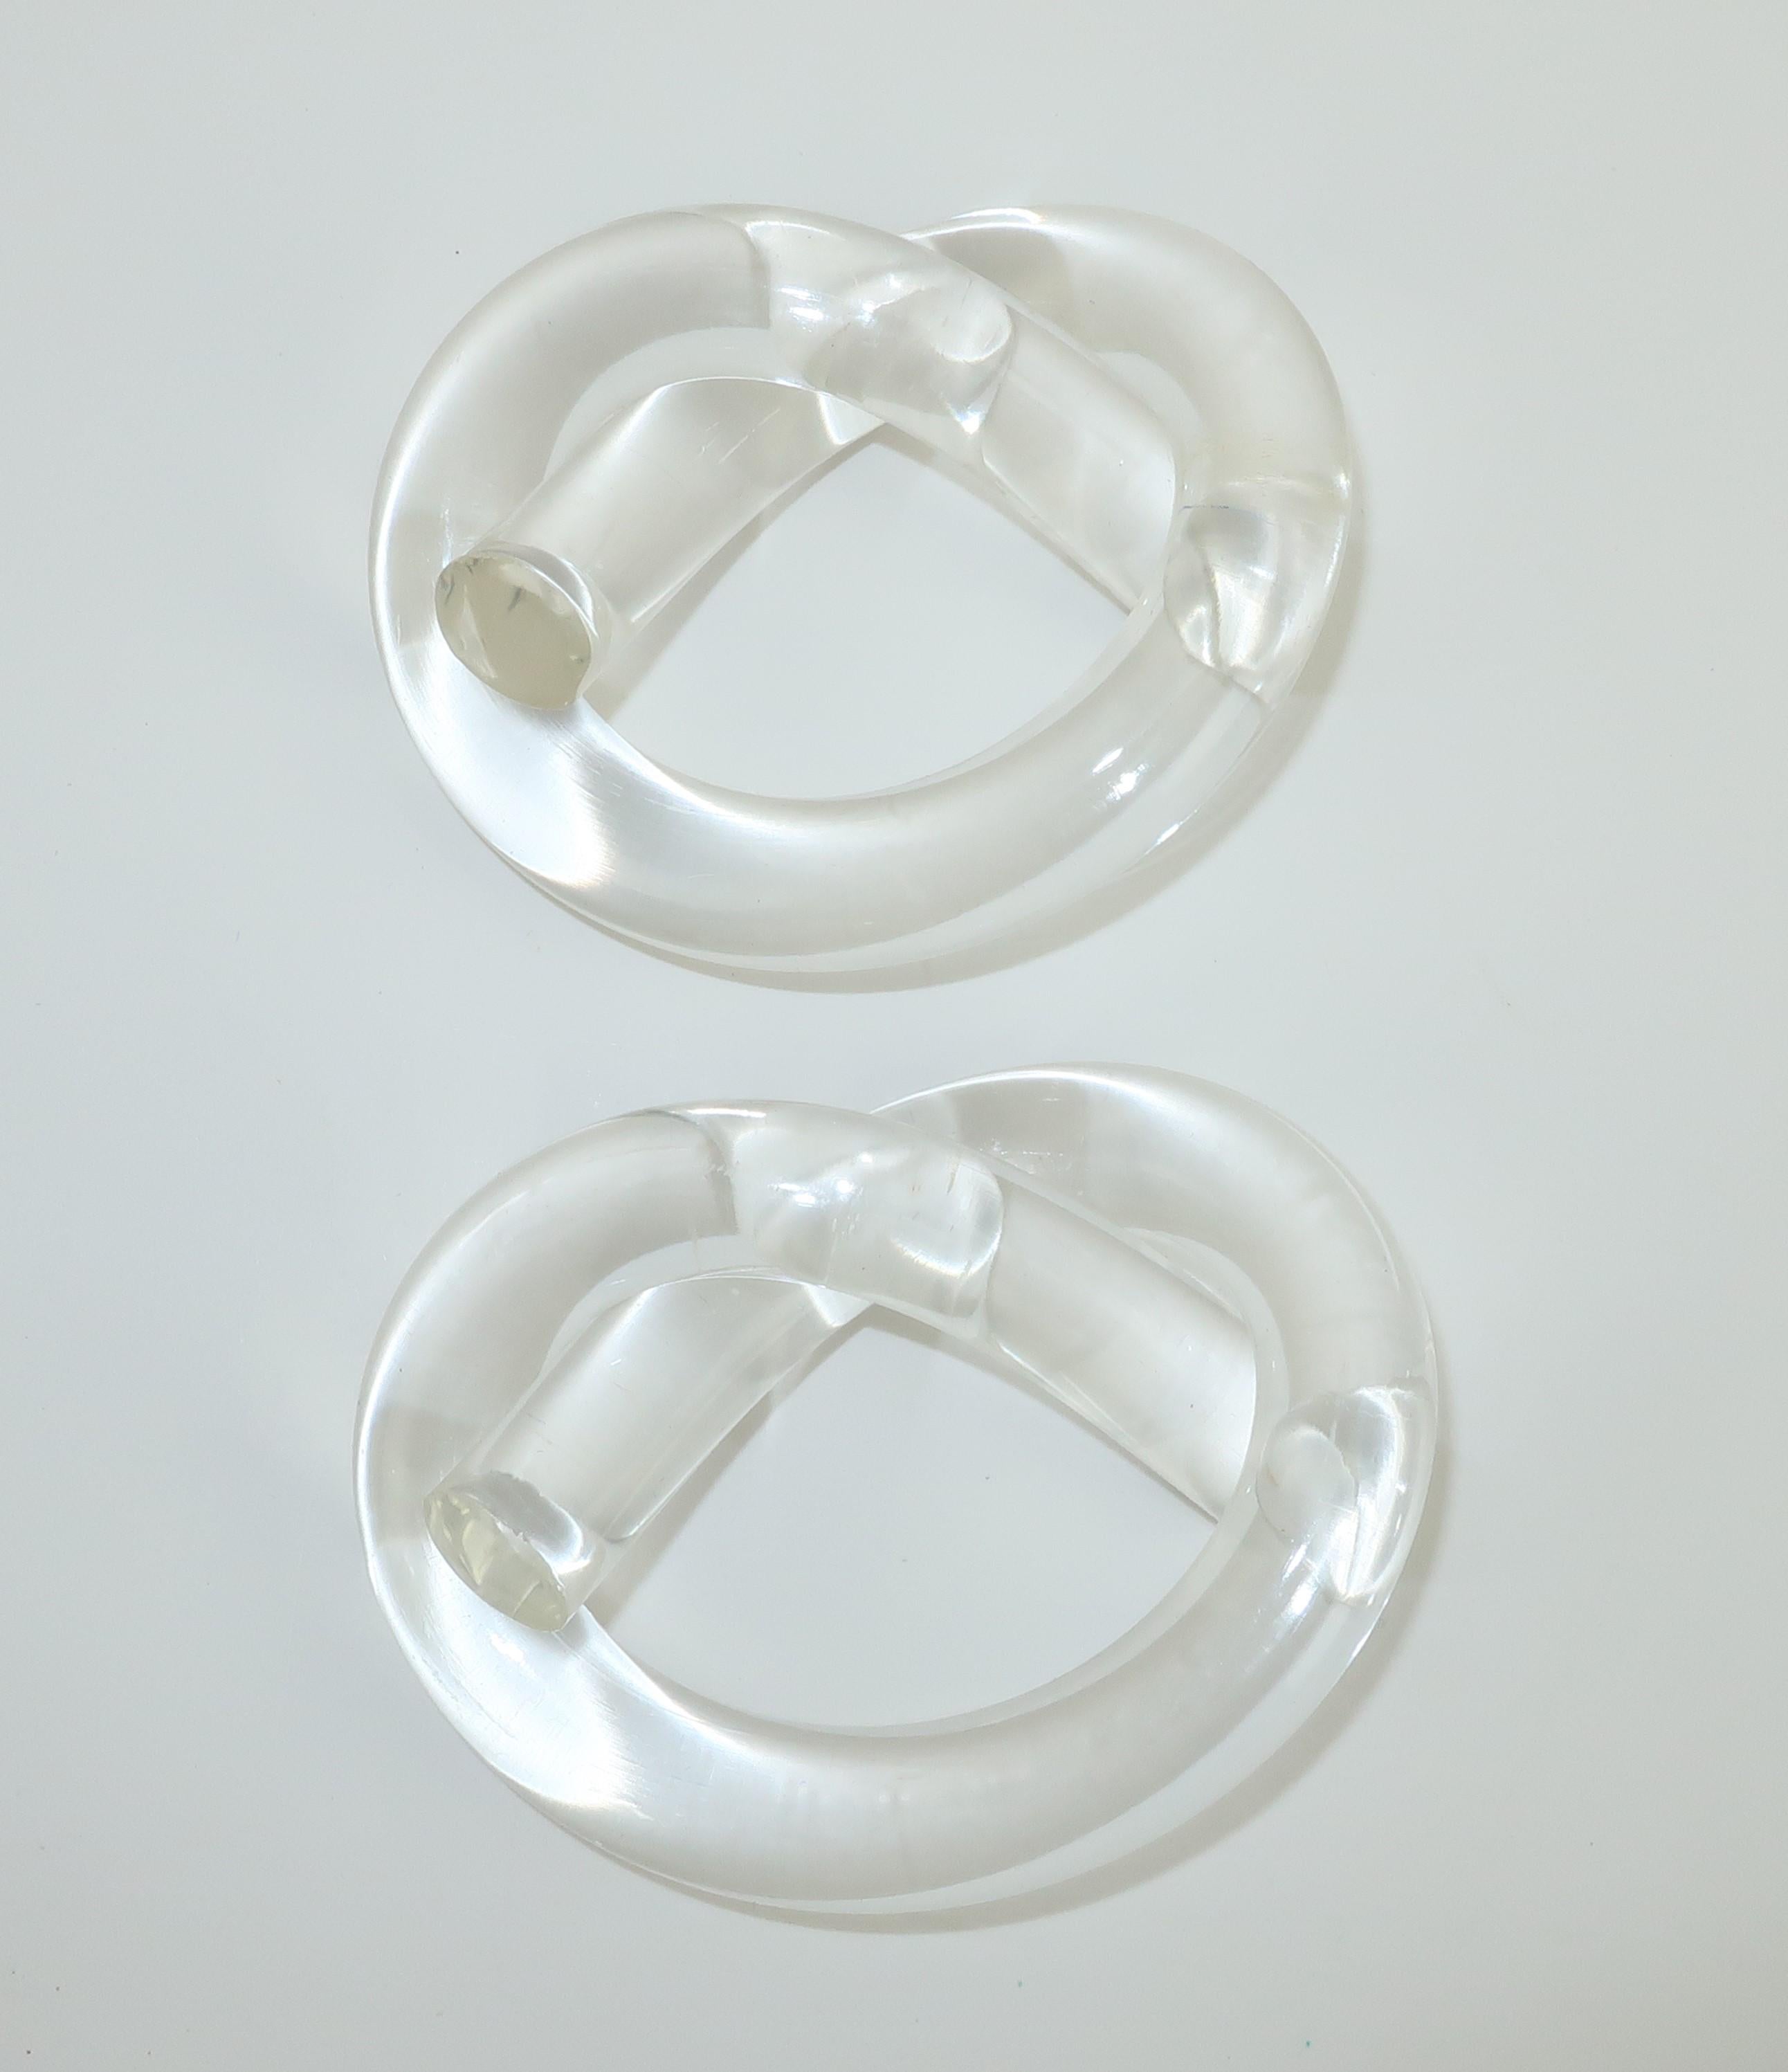 Add a glamorous touch to your dinner table with a set of 12 pretzel shaped napkin rings. The set looks fab with everything from formal settings to casual table decor. This design is attributed to Dorothy Thorpe and they are certainly reminiscent of